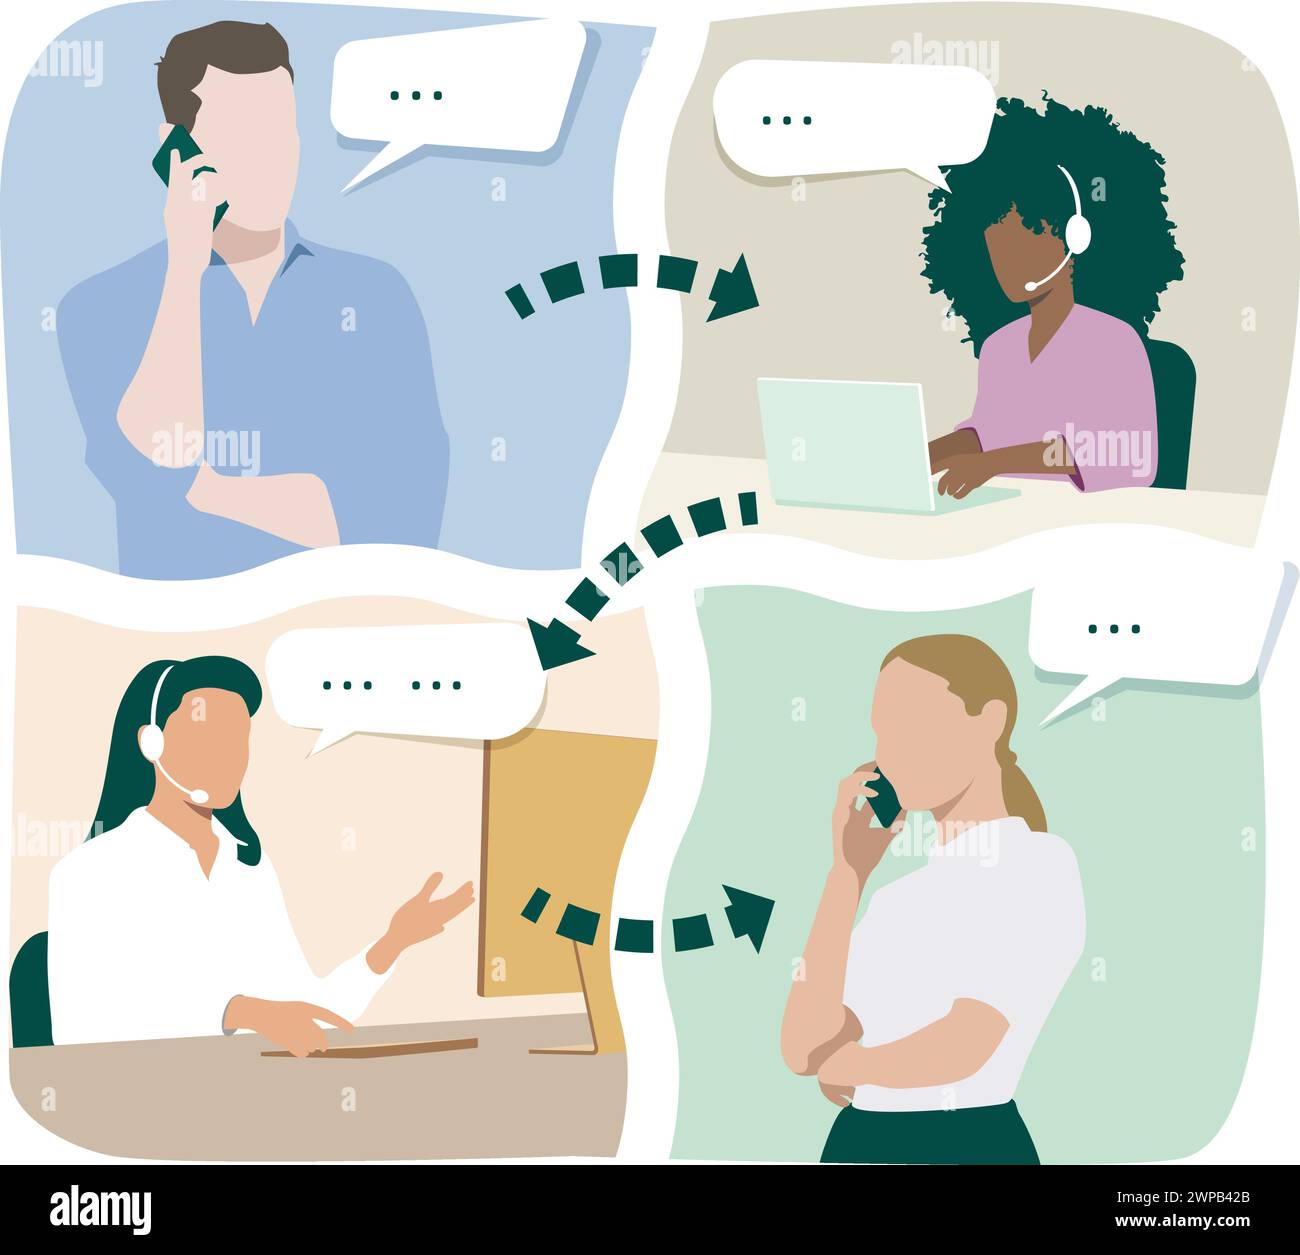 Communication between four people with each other through a telephone call. Stock Vector